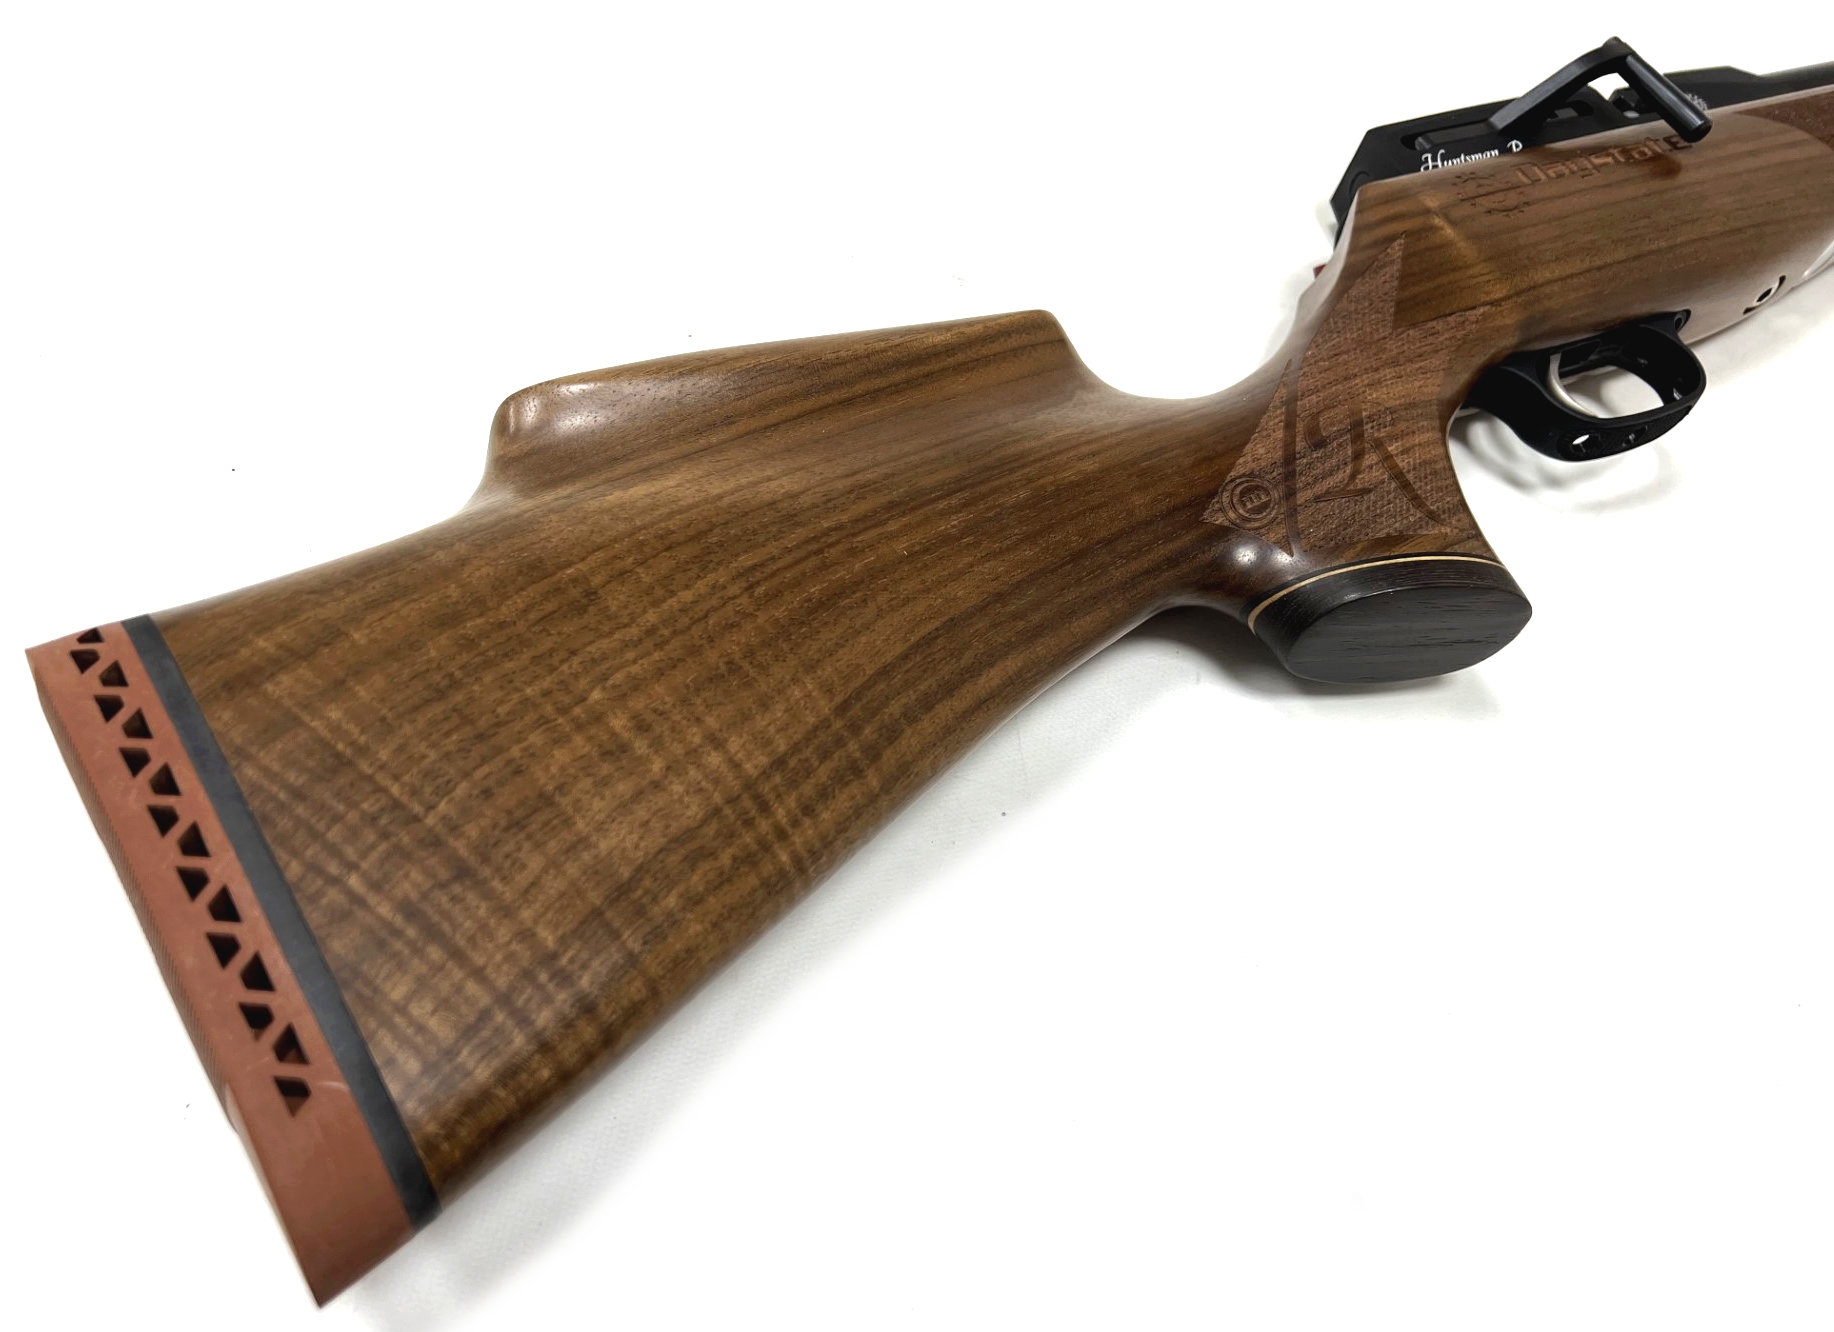 Daystate Huntsman Revere .177 Pre-Charged Air Rifle - 240229/007 Image 3